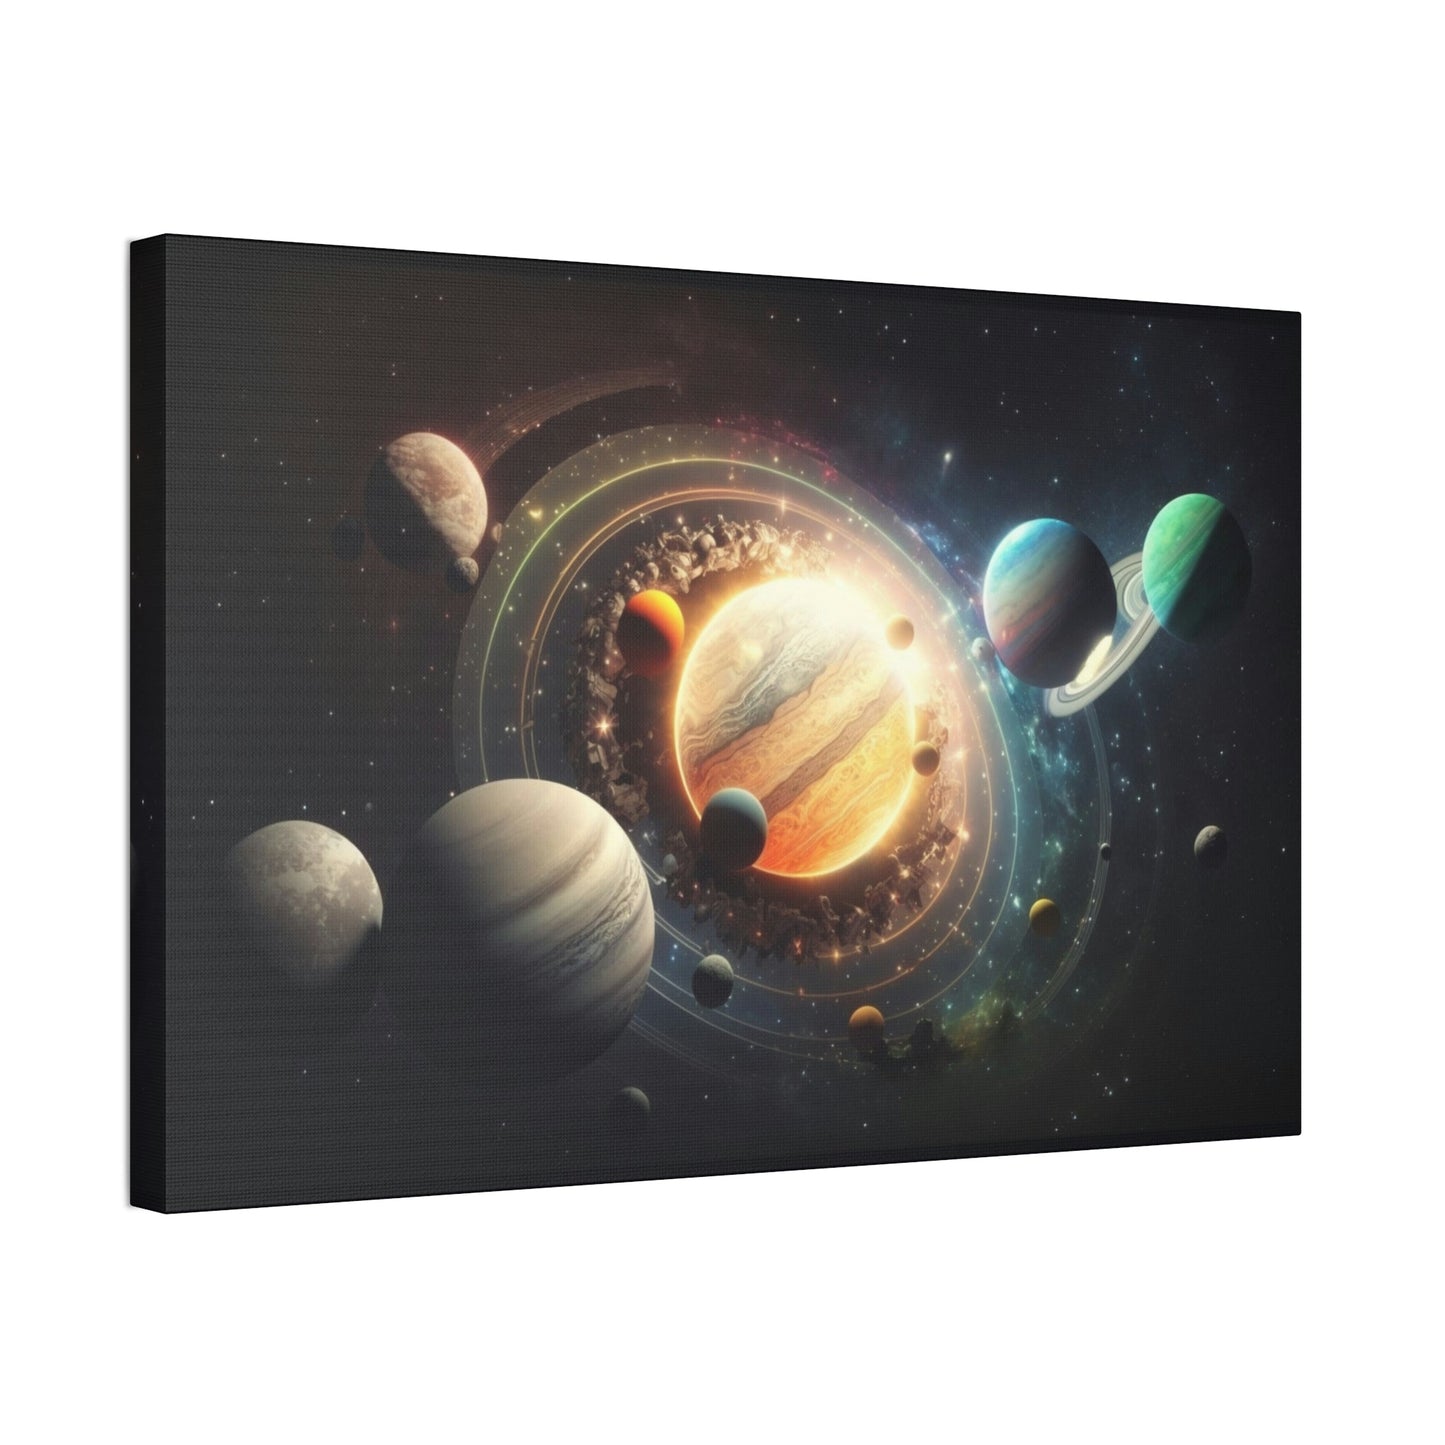 Starry Nights: Framed Canvas Art of the Solar System to Inspire Your Inner Astronomer